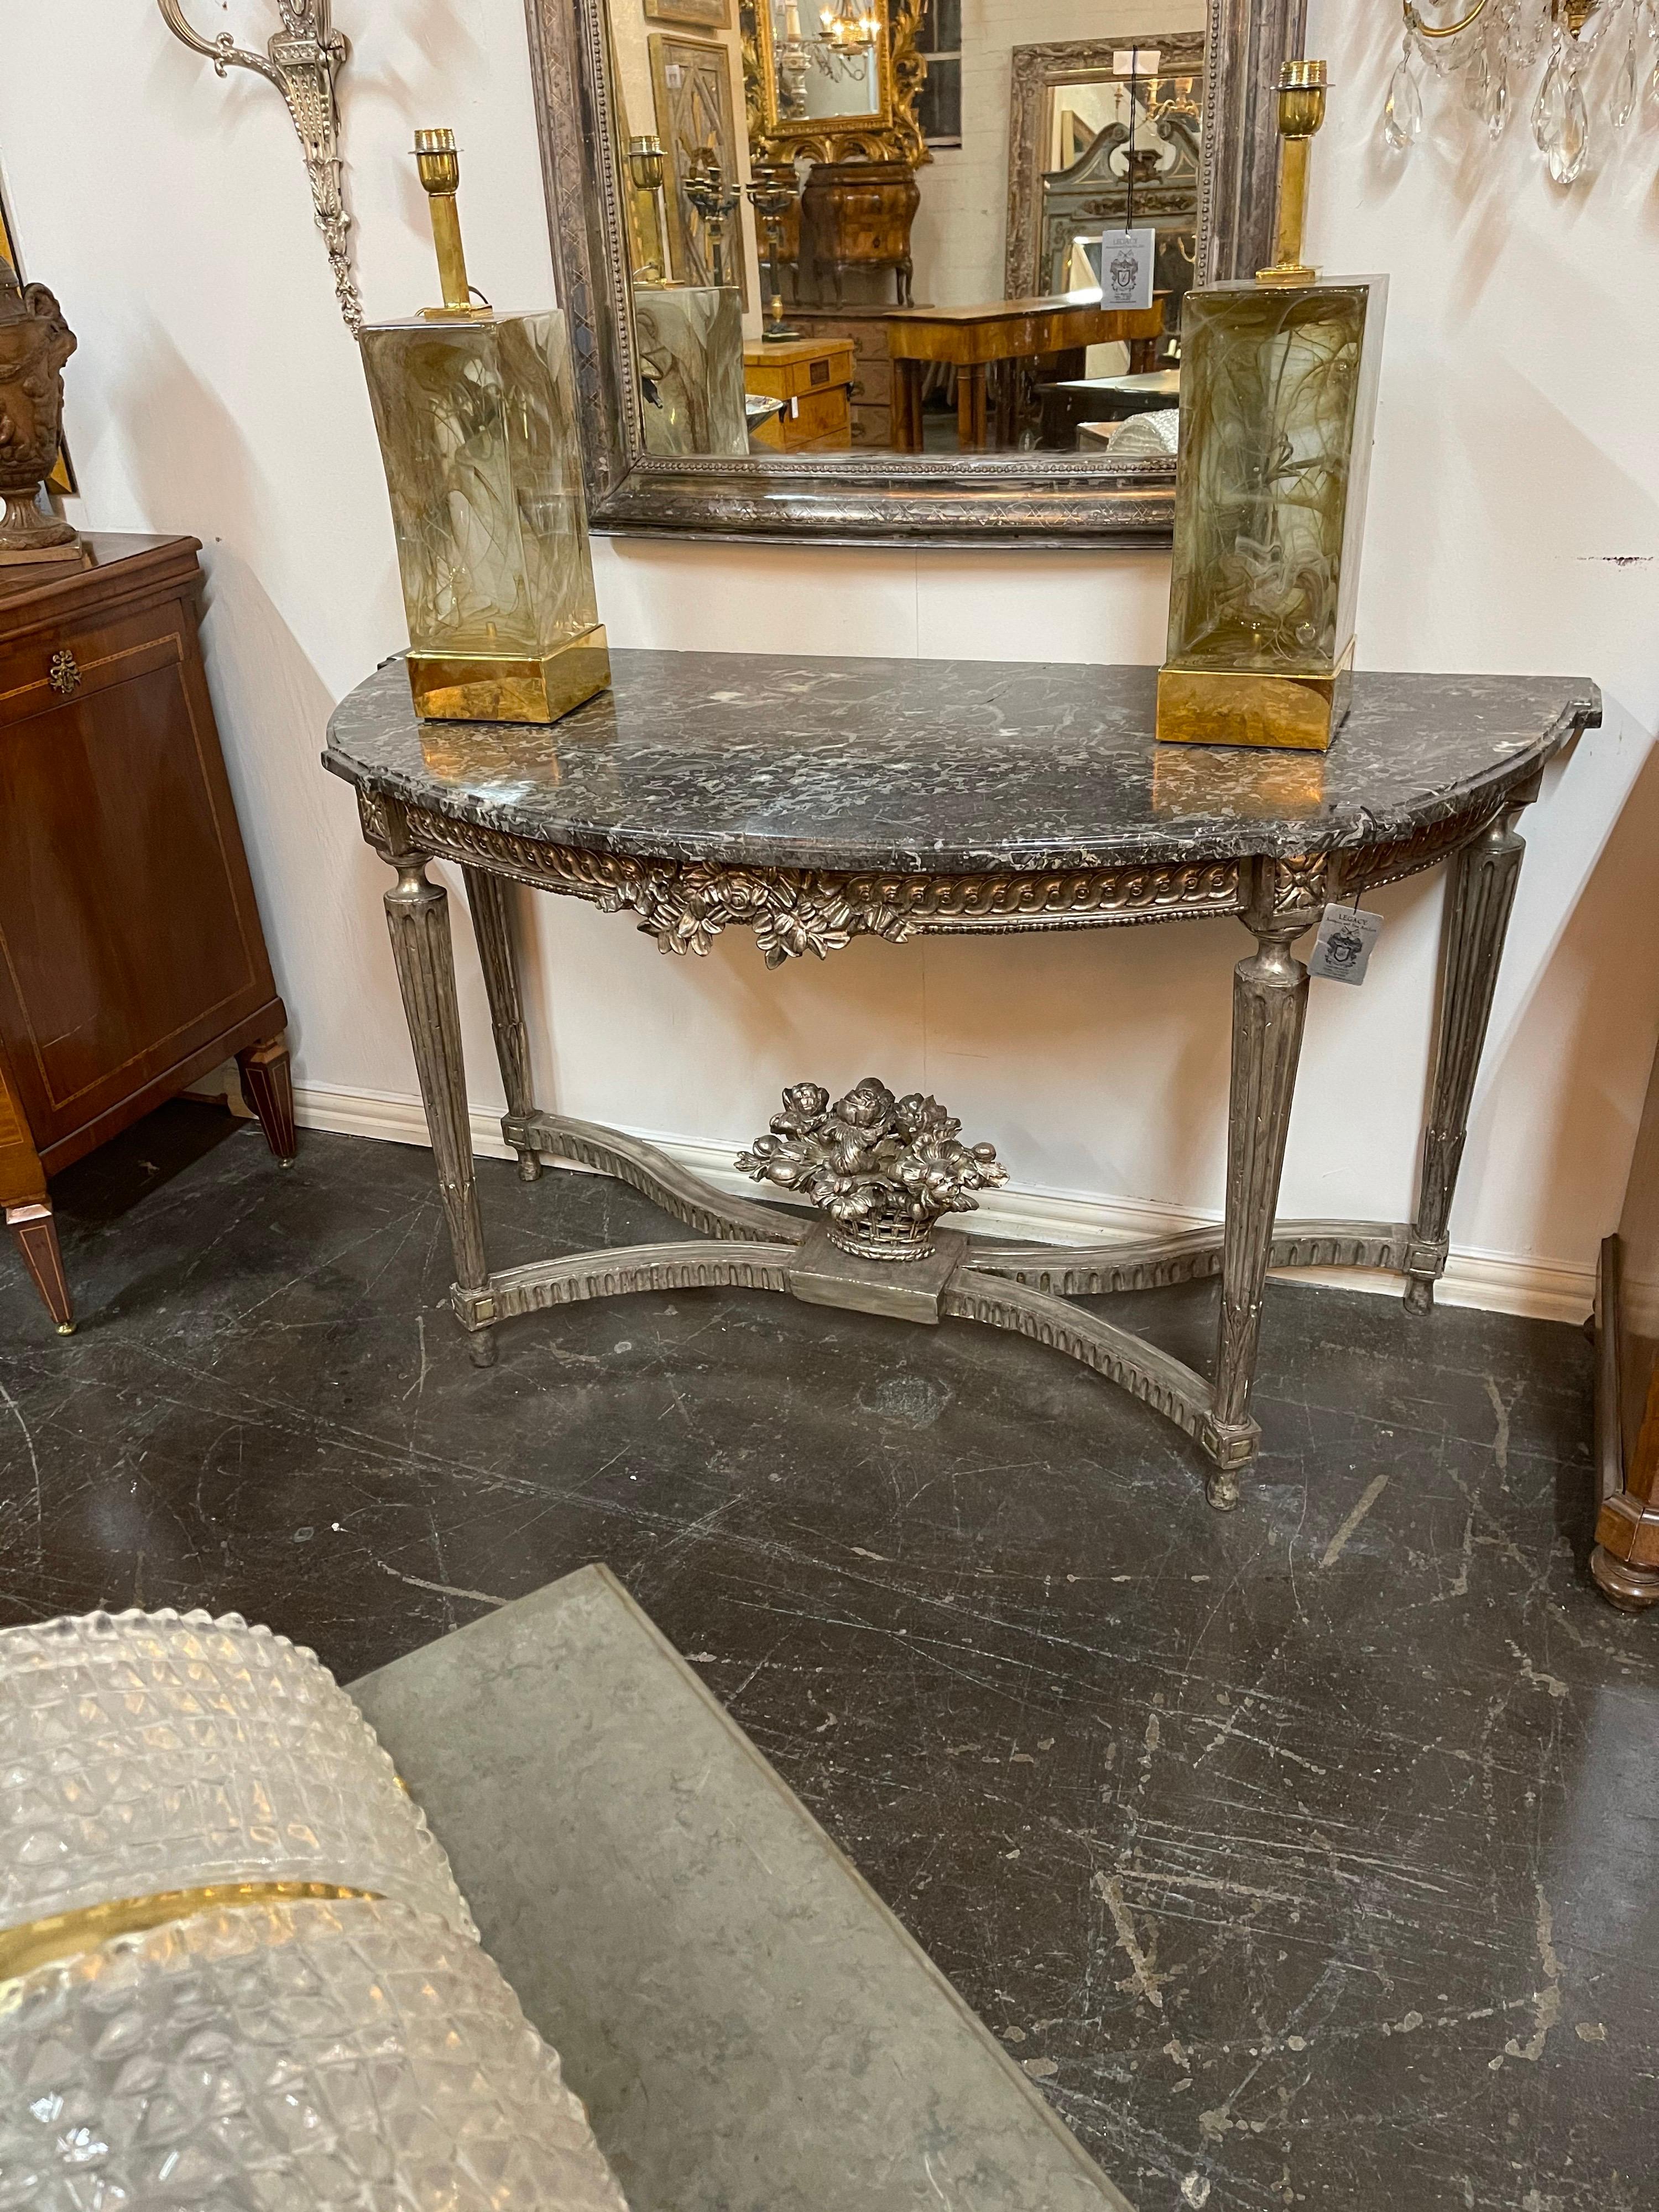 Superb 19th century French Louis XVI style silver gilt carved wood console table with a fine quality shaped marble top. The frieze nicely carved and centred by leaf accents. 

The entire on tapering fluted legs held by a contoured stretcher